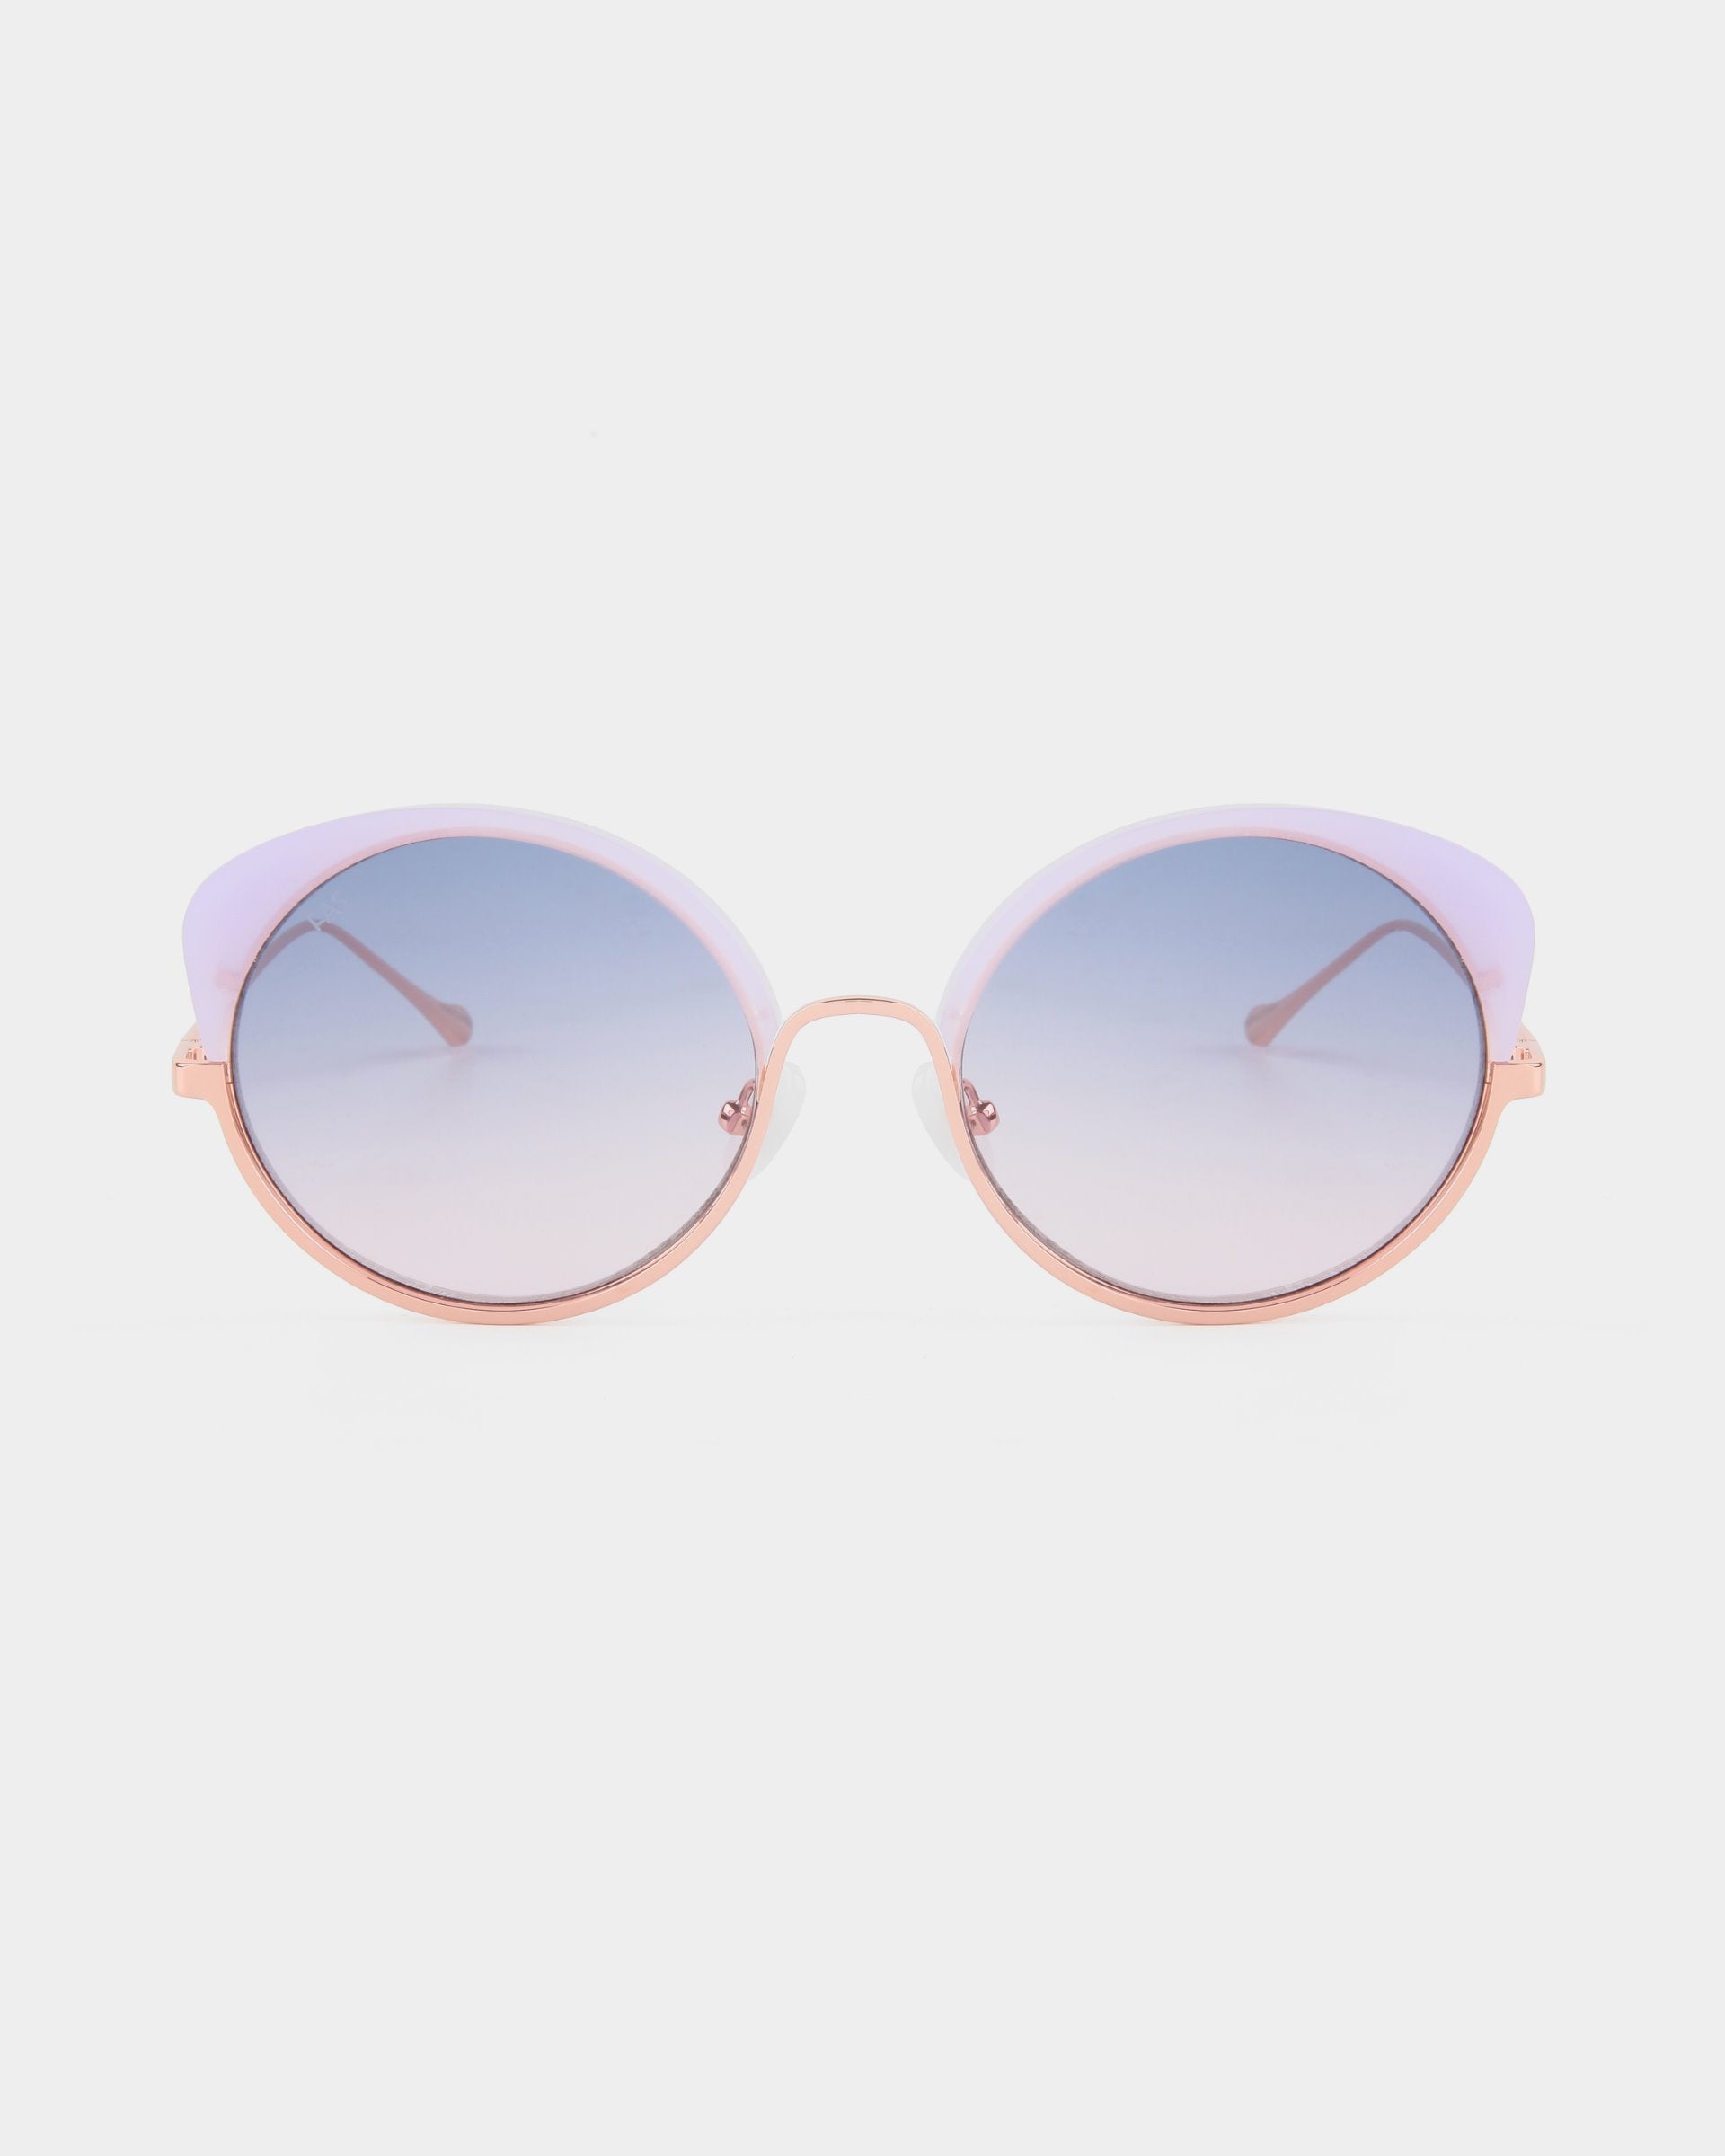 A pair of Cocoon sunglasses from For Art's Sake® with a gradient lens from blue to clear. The frame is a blend of gold and light purple, with thin gold arms. These handcrafted eyewear pieces offer UV protection and are displayed against a white background.